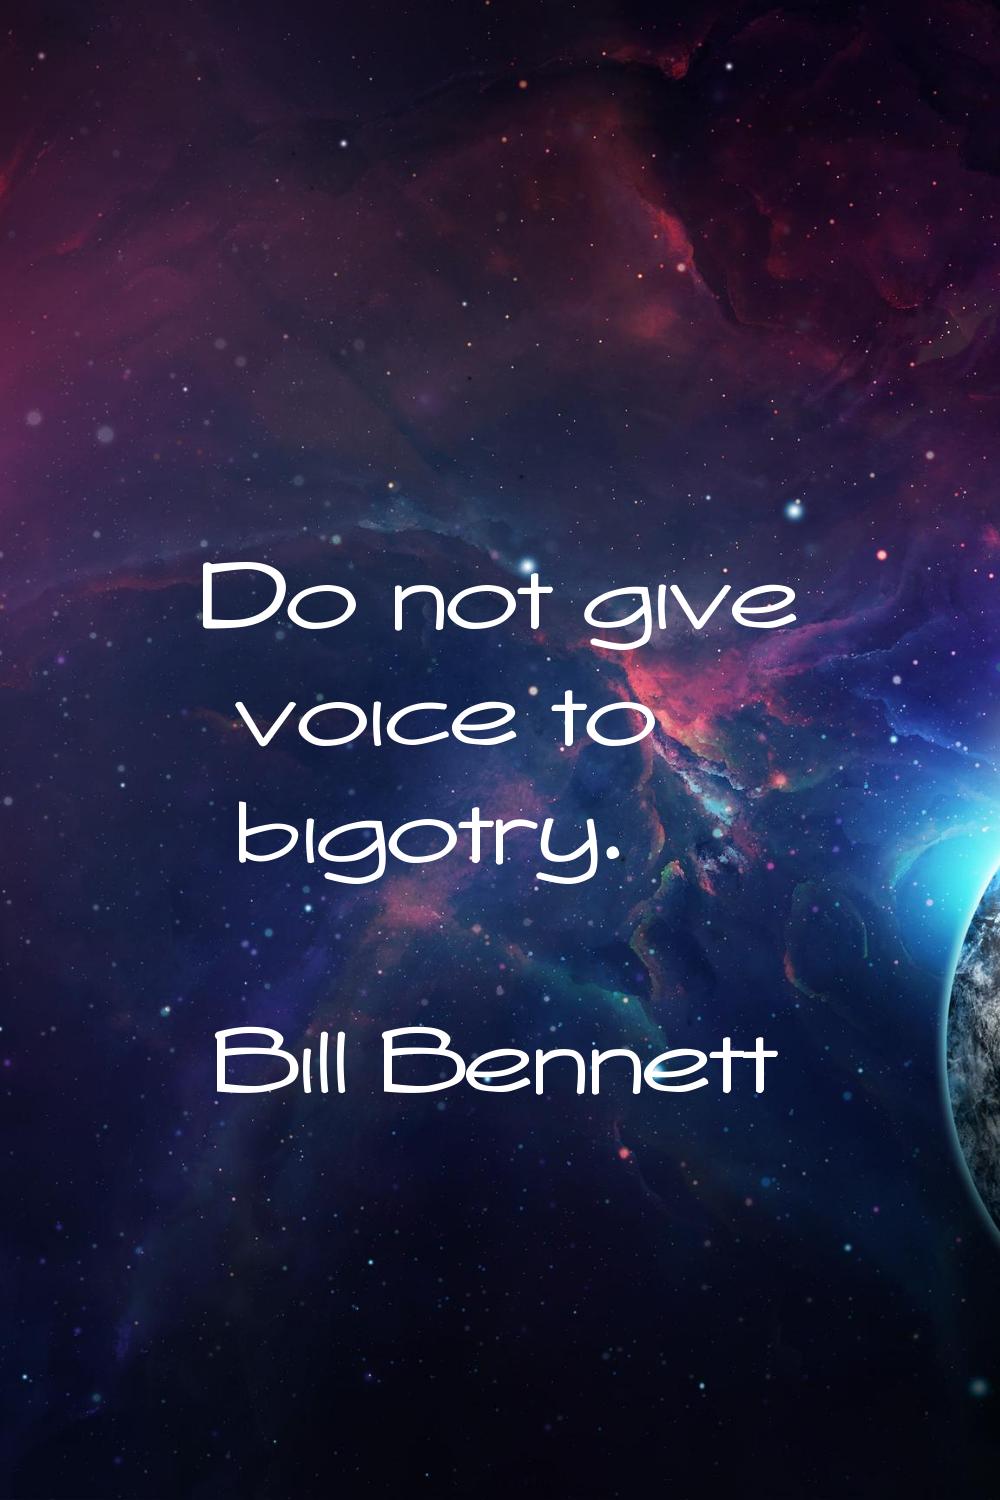 Do not give voice to bigotry.